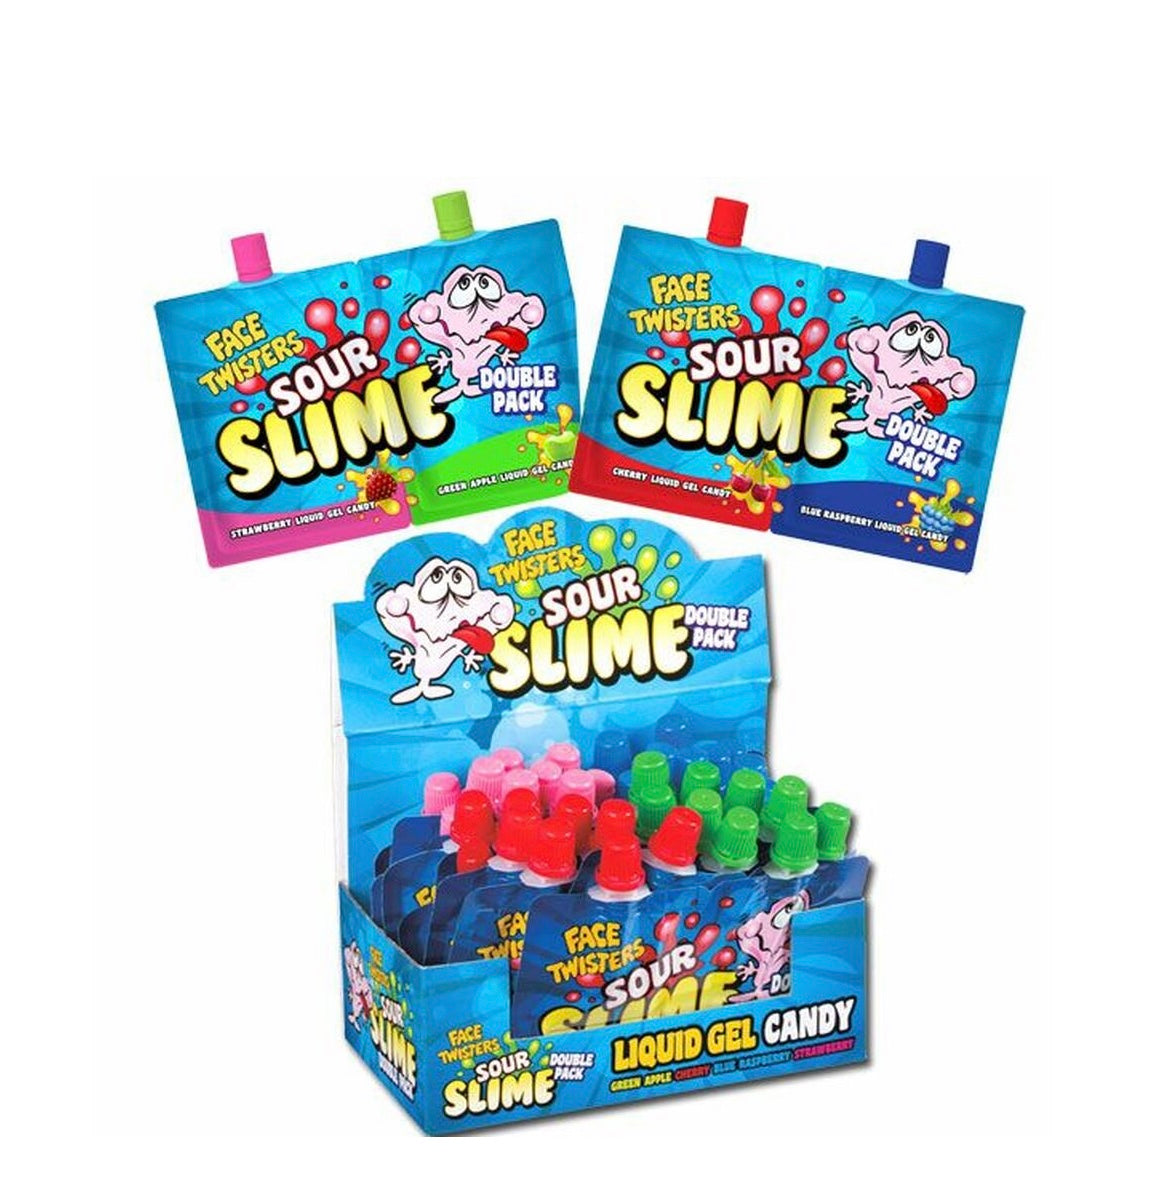 Face twisters sour slime